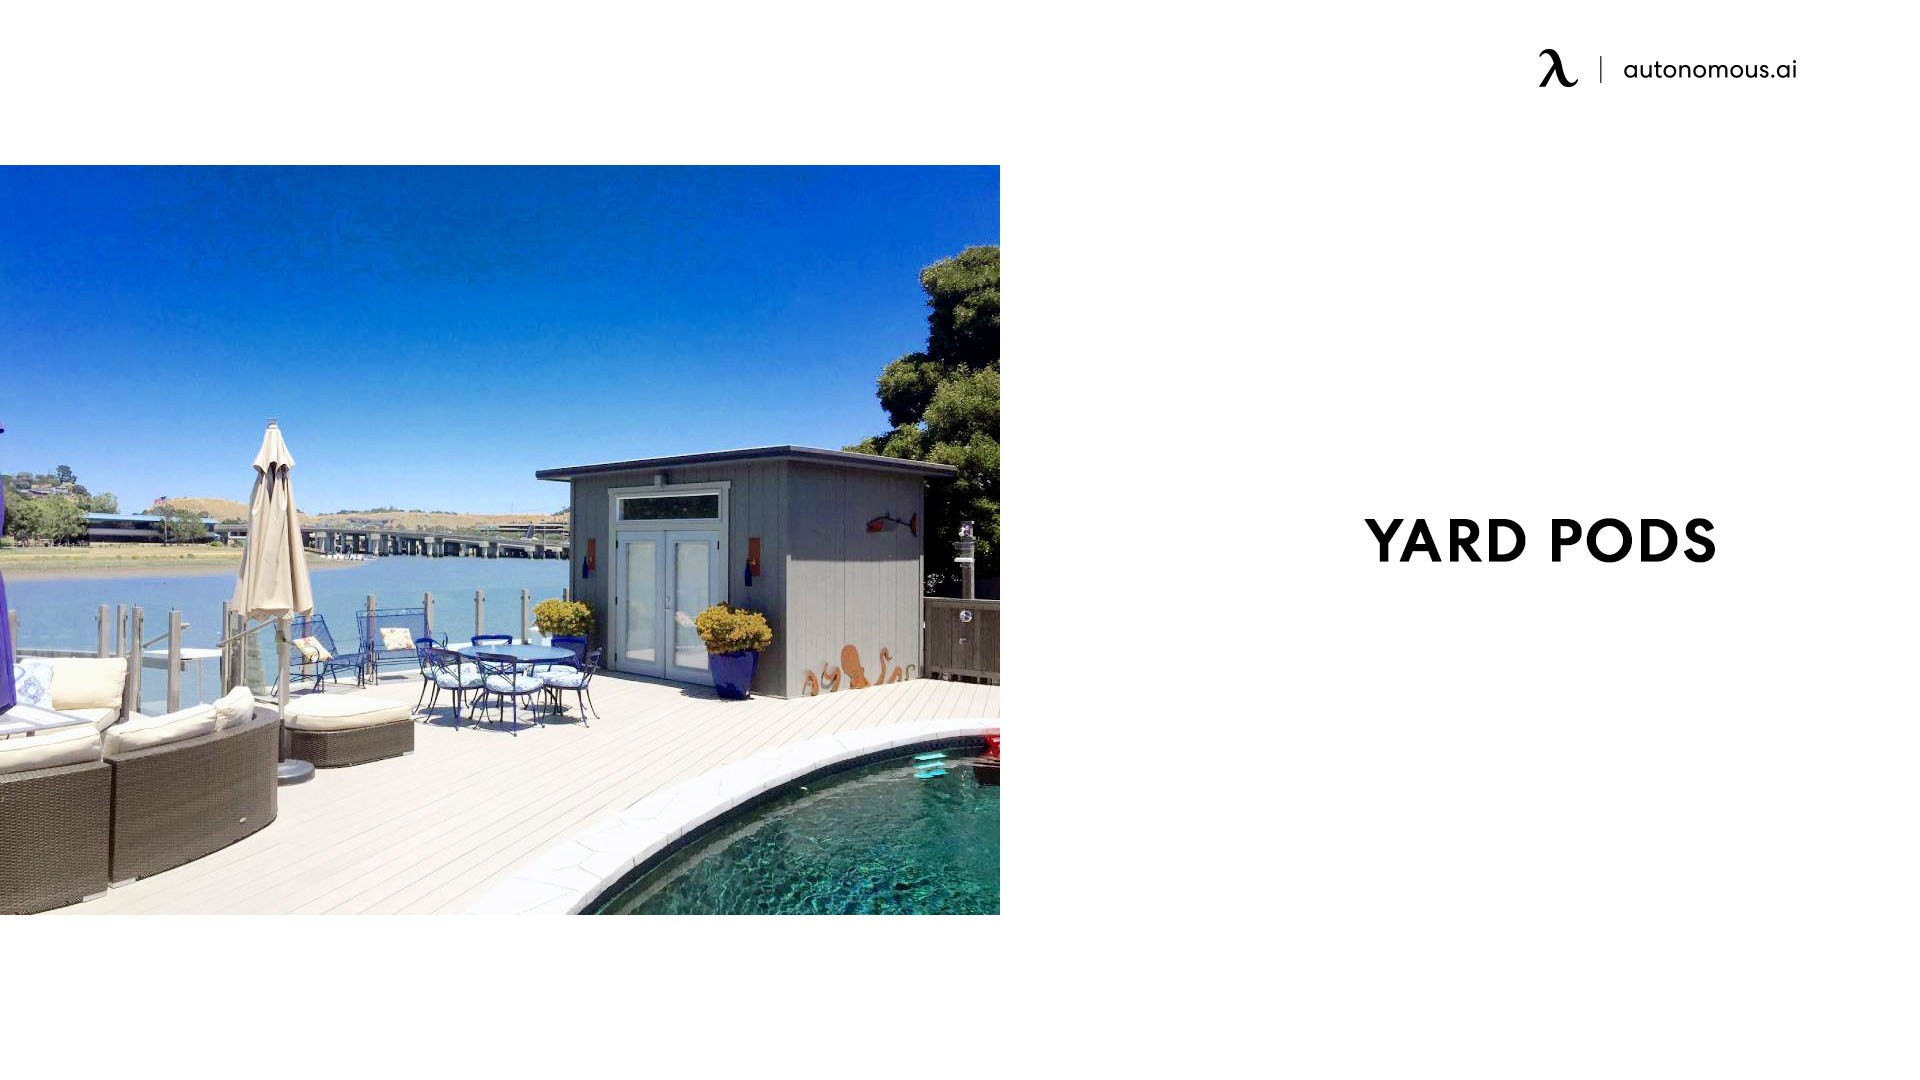 YardPods small office shed